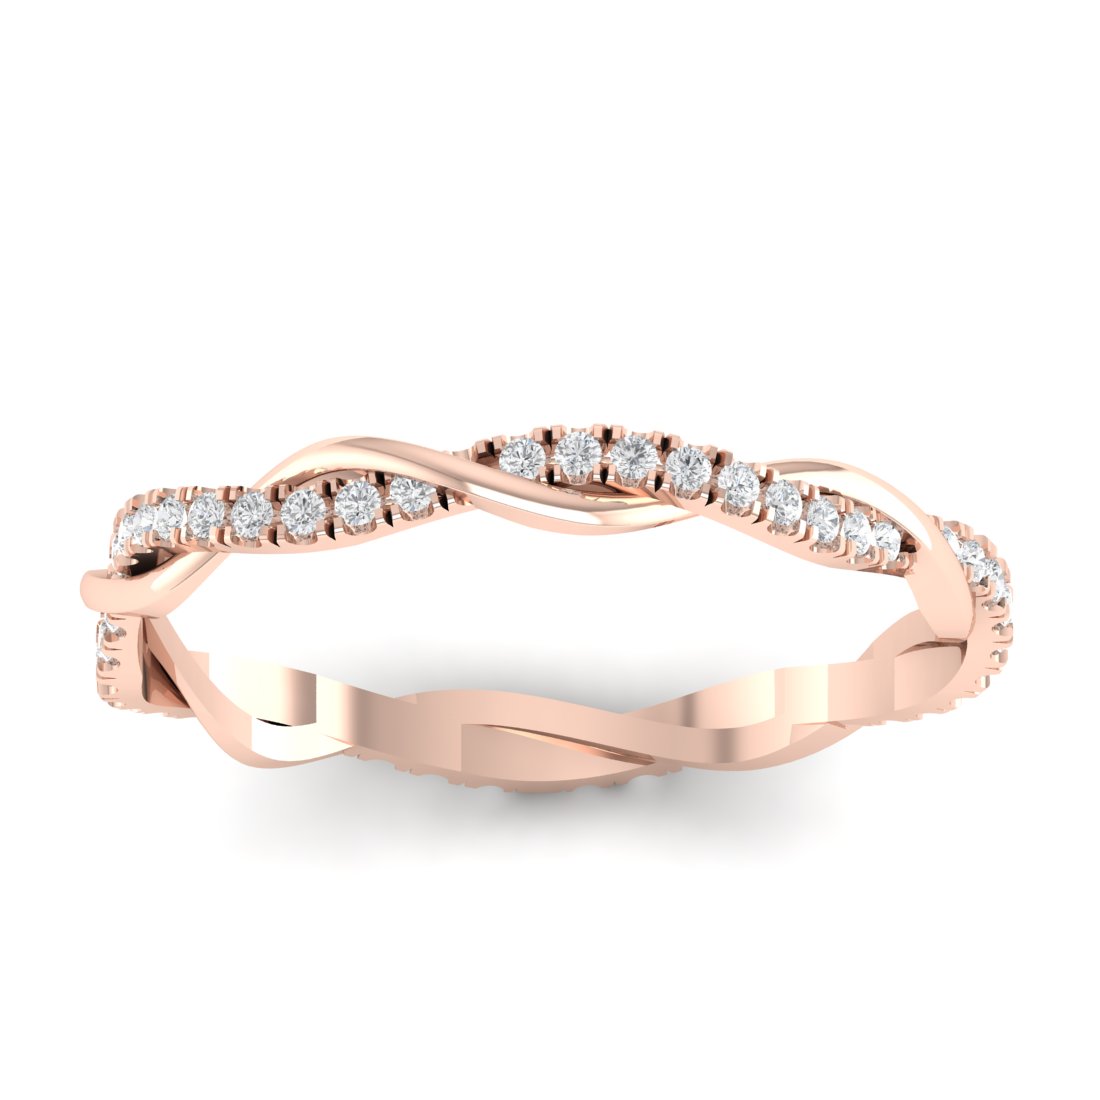 A Guide to Choose the Best Wedding Band For Solitaire Ring